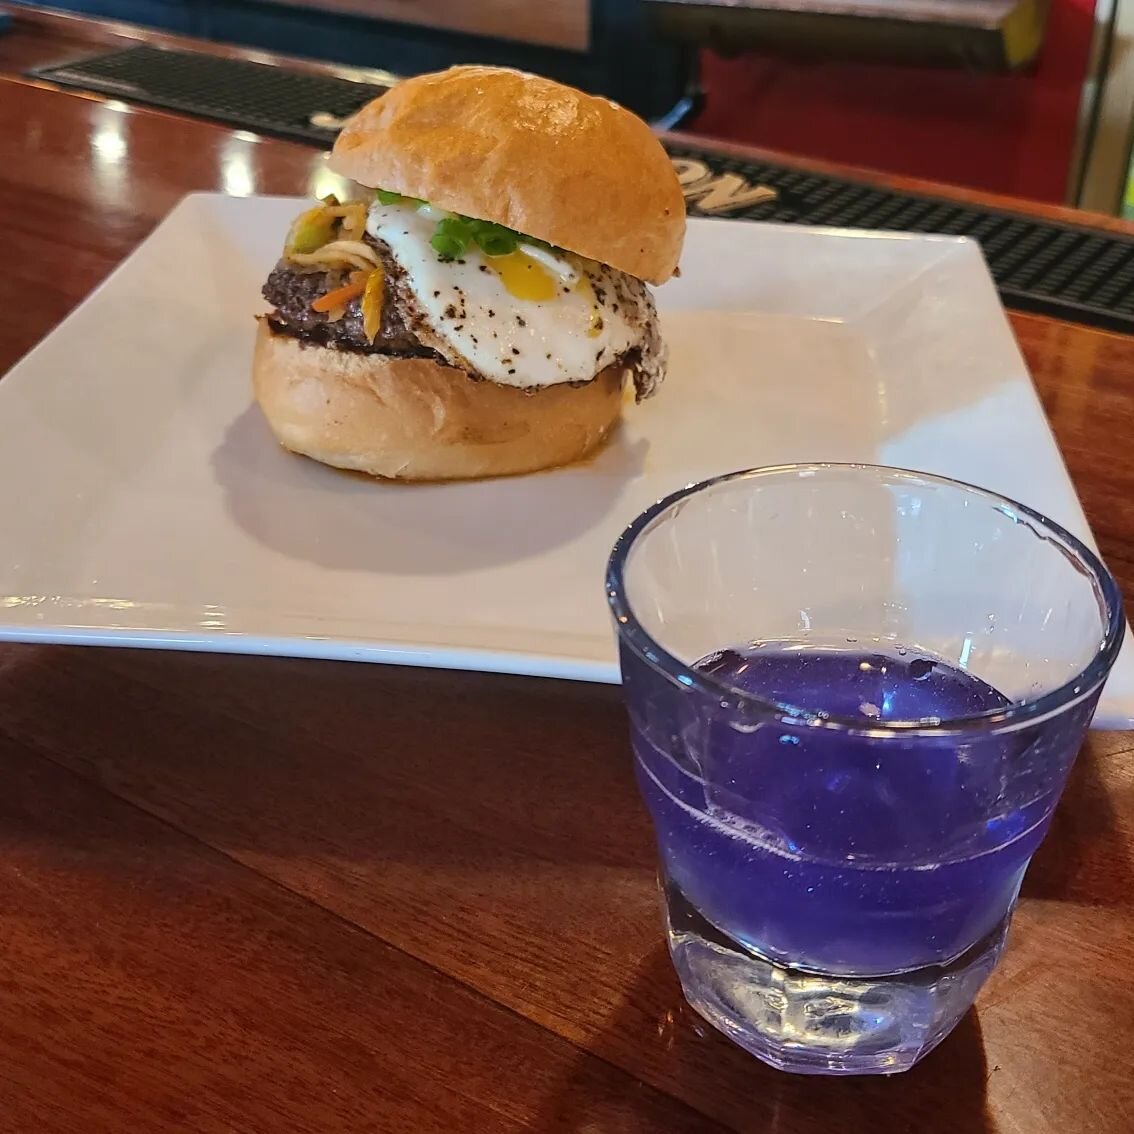 KPOP night is upon us! Our Seoul Burger is dressed to impress( house made Bulgogi bbq, Kimchi,  and fried egg) pair it with #BTS shot Louisiana's own @wetlandssake infused with purple ✨edible glitter✨